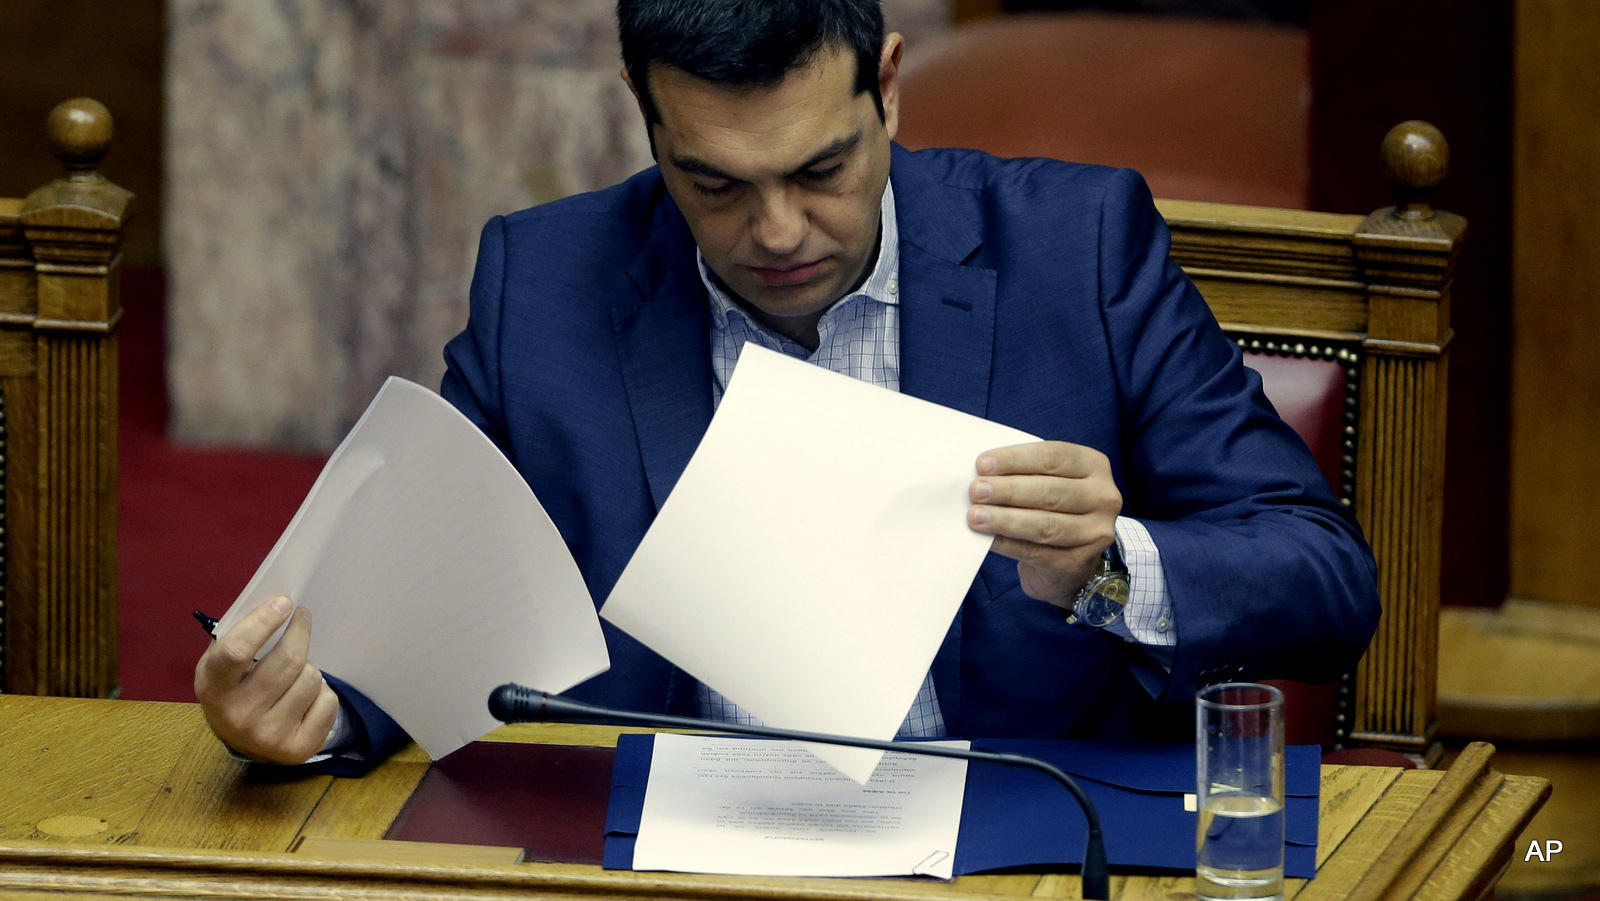 Greek Prime Minister Alexis Tsipras reads his notes as he prepares to answer opposition questions in parliament in Athens, on Friday, July 31, 2015.